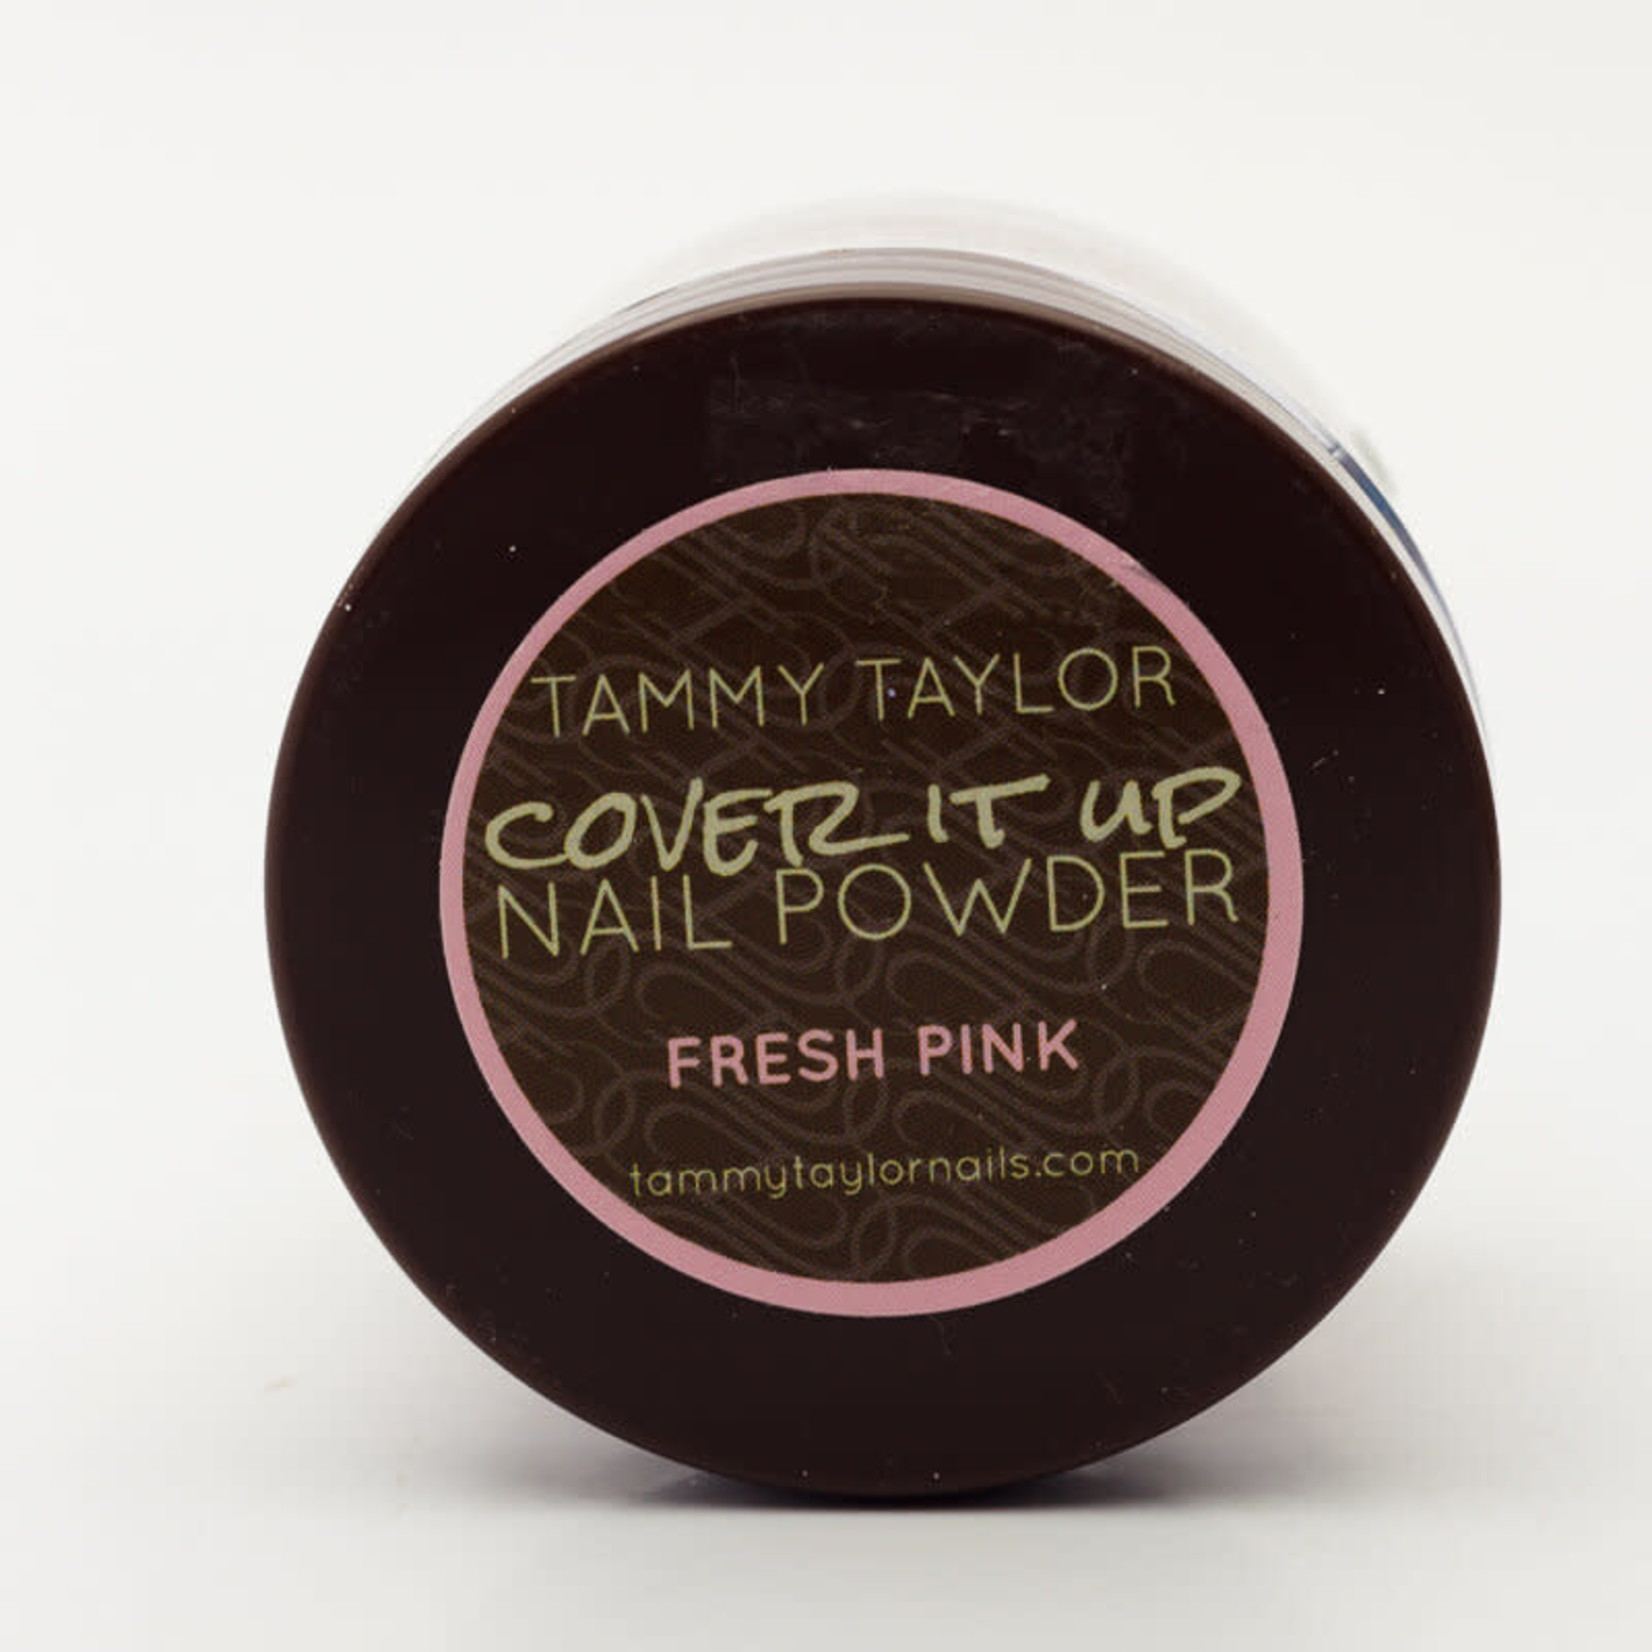 Tammy Taylor Tammy Taylor - Cover It Up - Fresh Pink - 1.5 oz